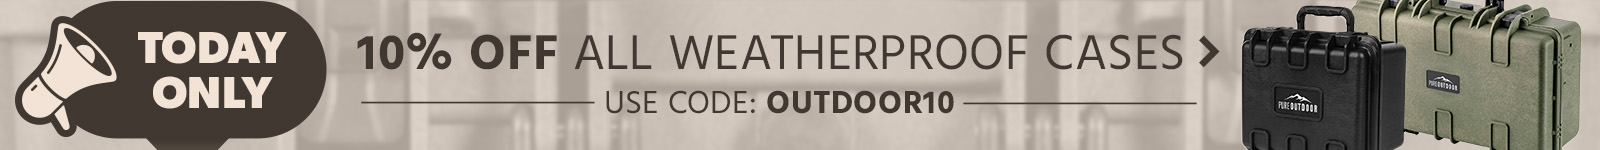 TODAY ONLY! 10% Off All Weatherproof Cases! Use Code: OUTDOOR10 Shop Now